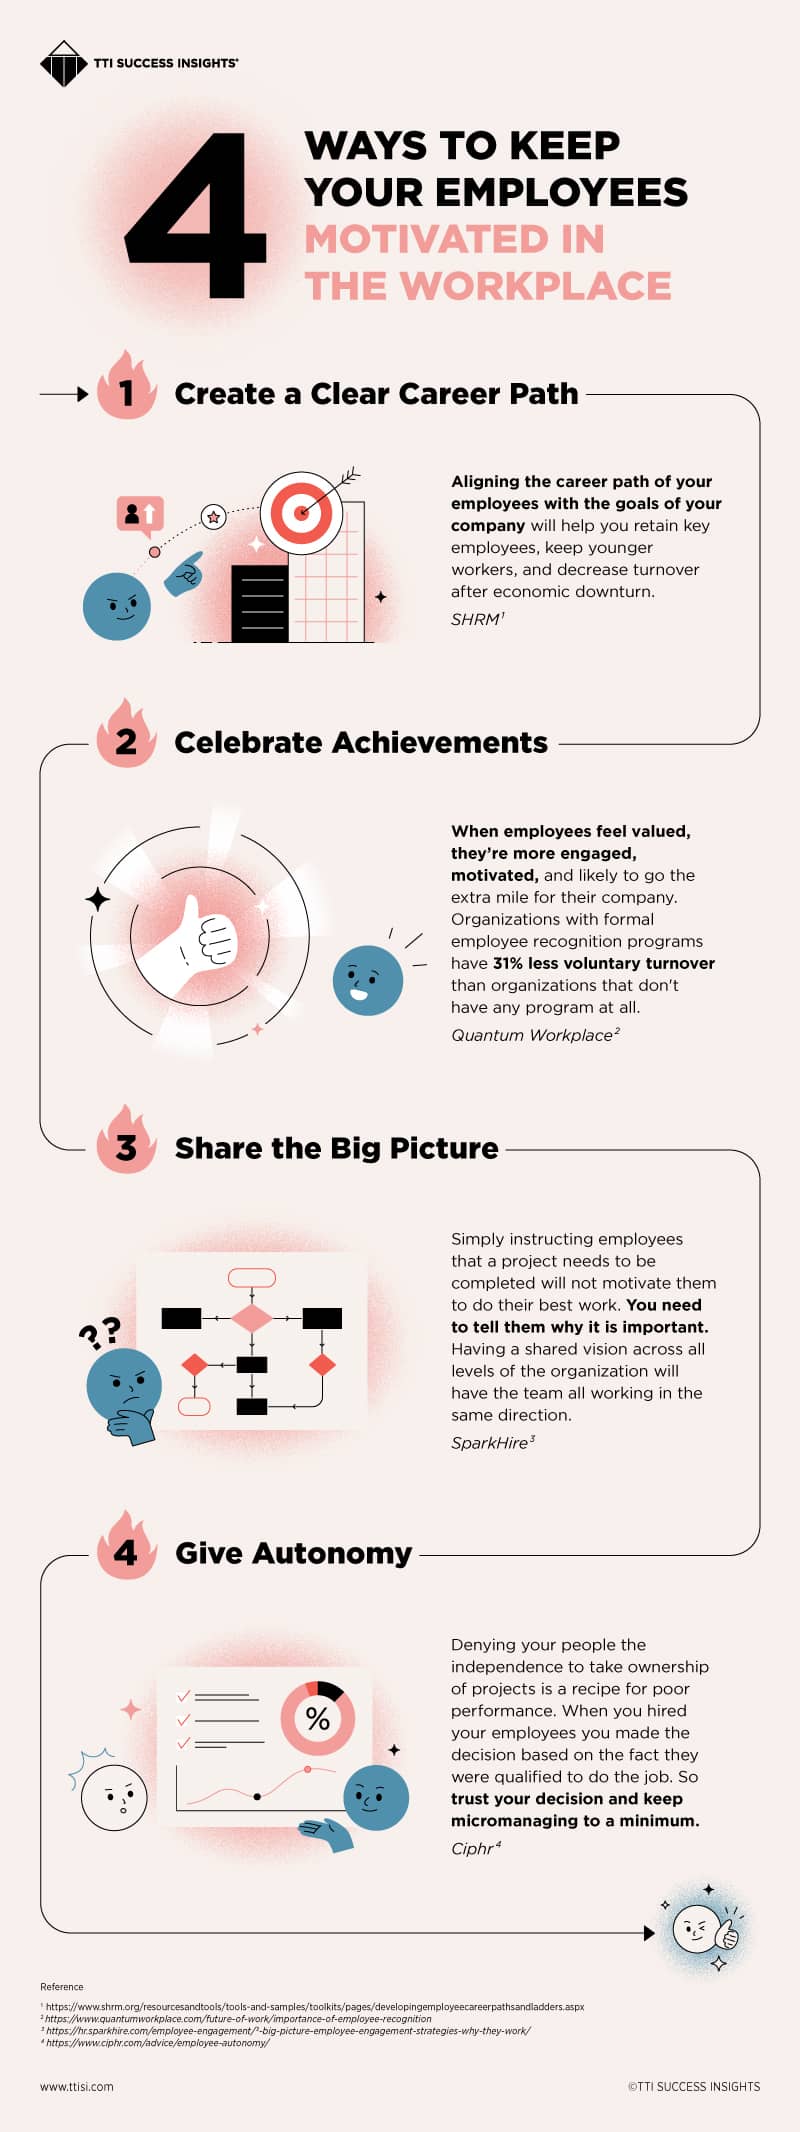 Ways to Keep Your Employees Motivated in the Workplace - Infographic